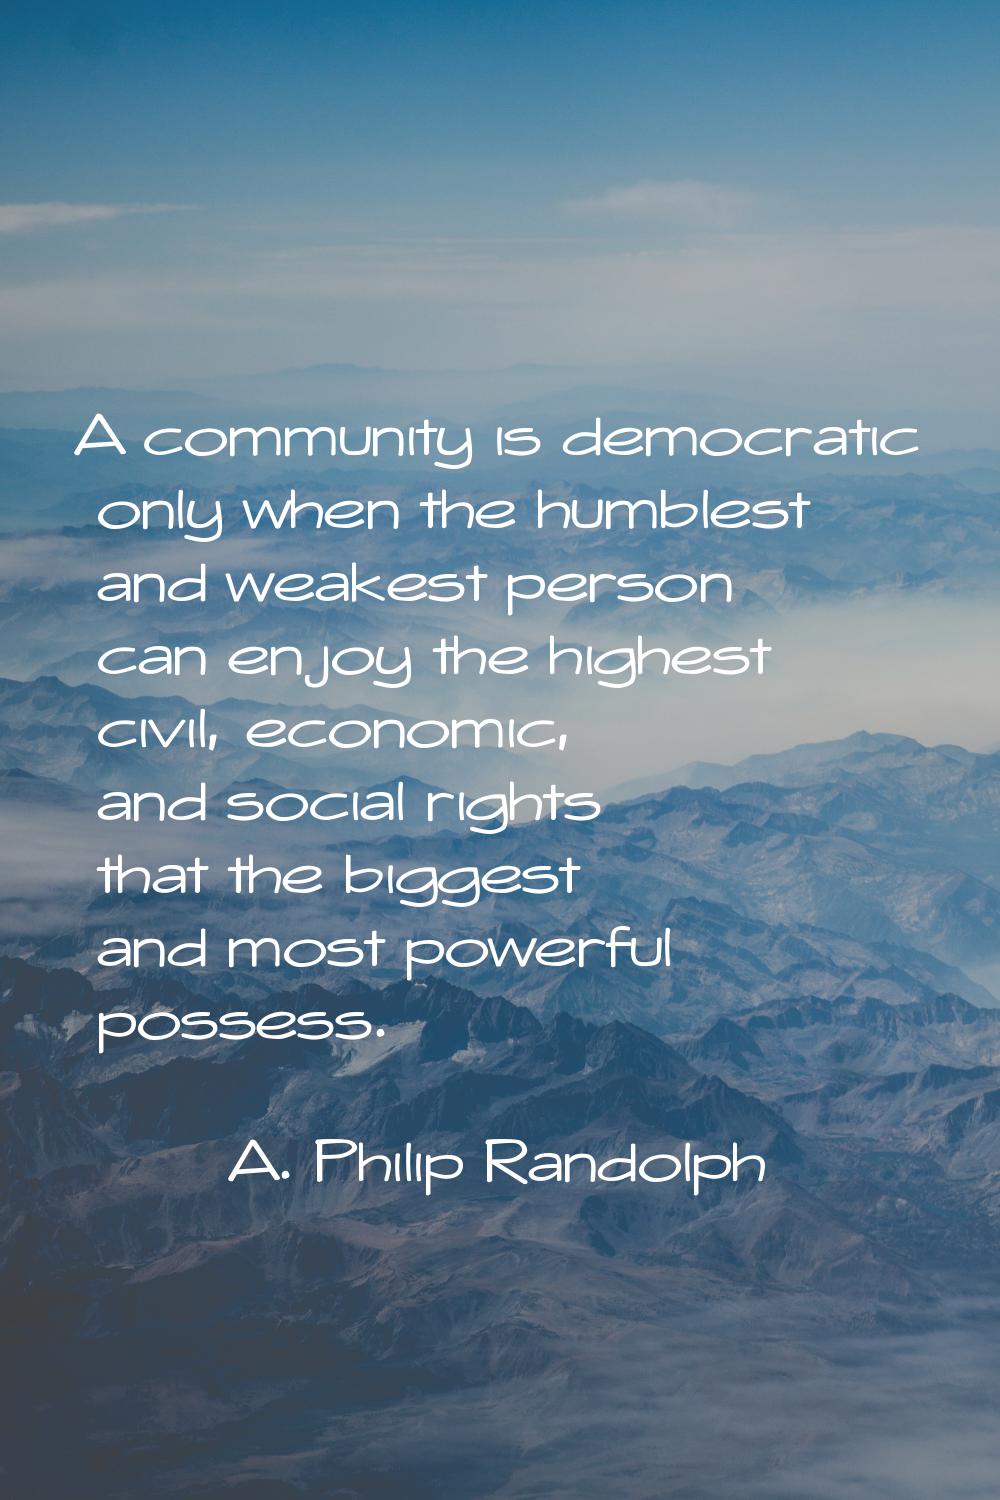 A community is democratic only when the humblest and weakest person can enjoy the highest civil, ec